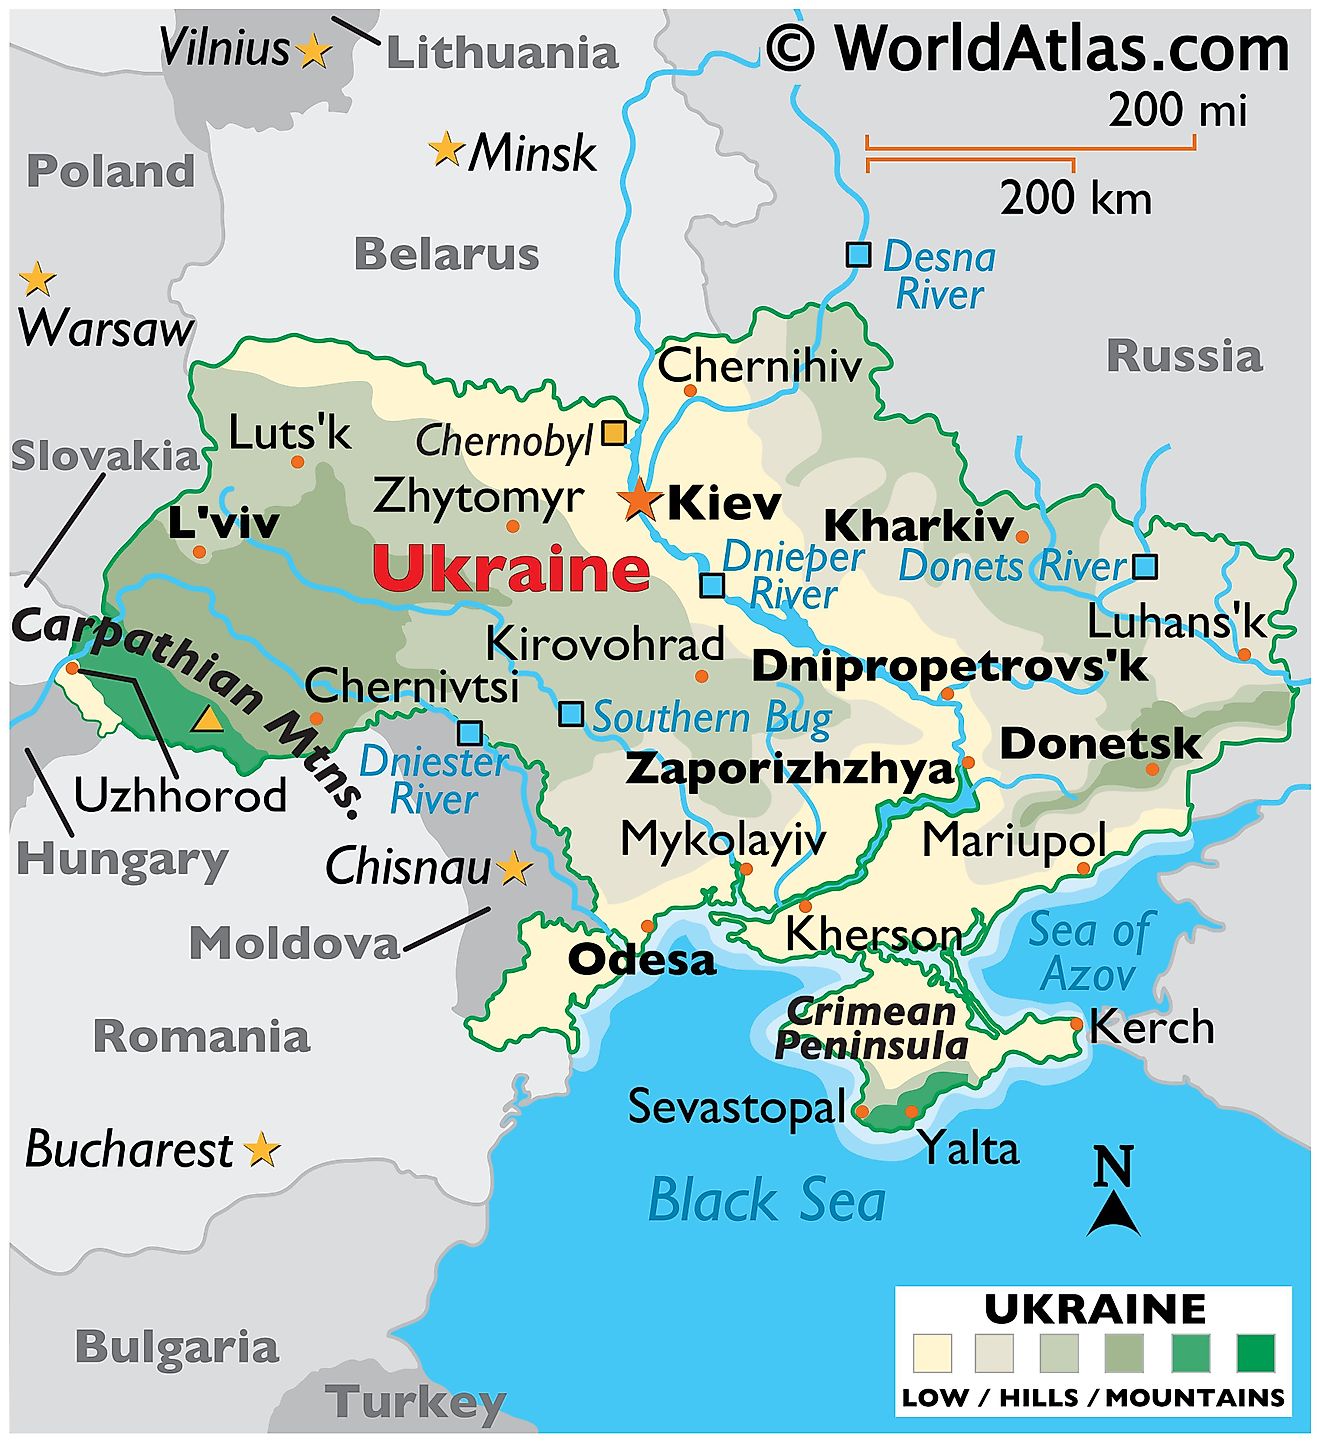 Physical Map of Ukraine showing its relief, major mountain ranges, Crimean peninsula, major rivers, bordering countries, important cities, etc.